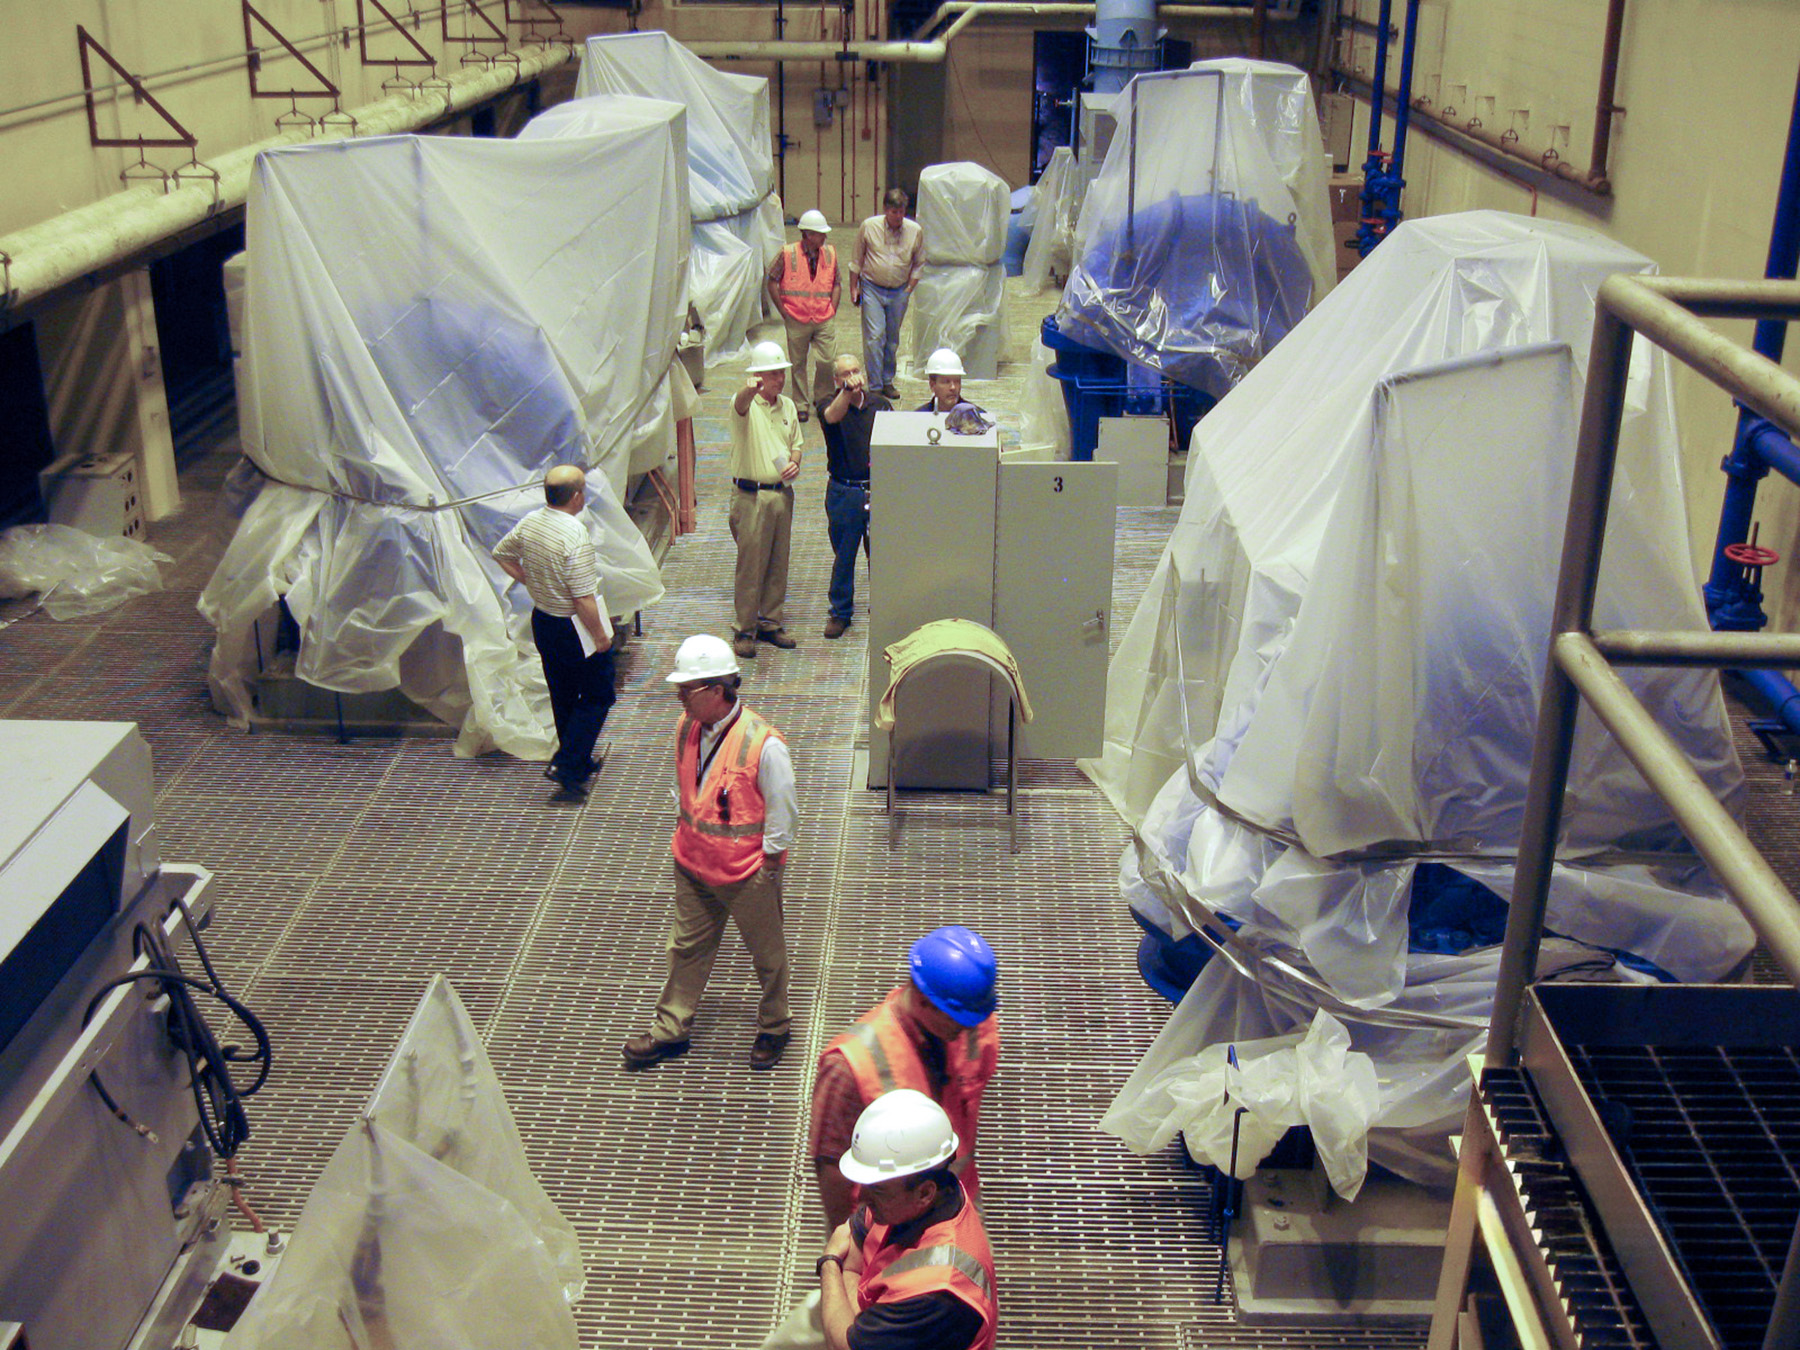 Workers with hard hats prepare to test equipment at K.R. Harrington Water Treatment Plant.